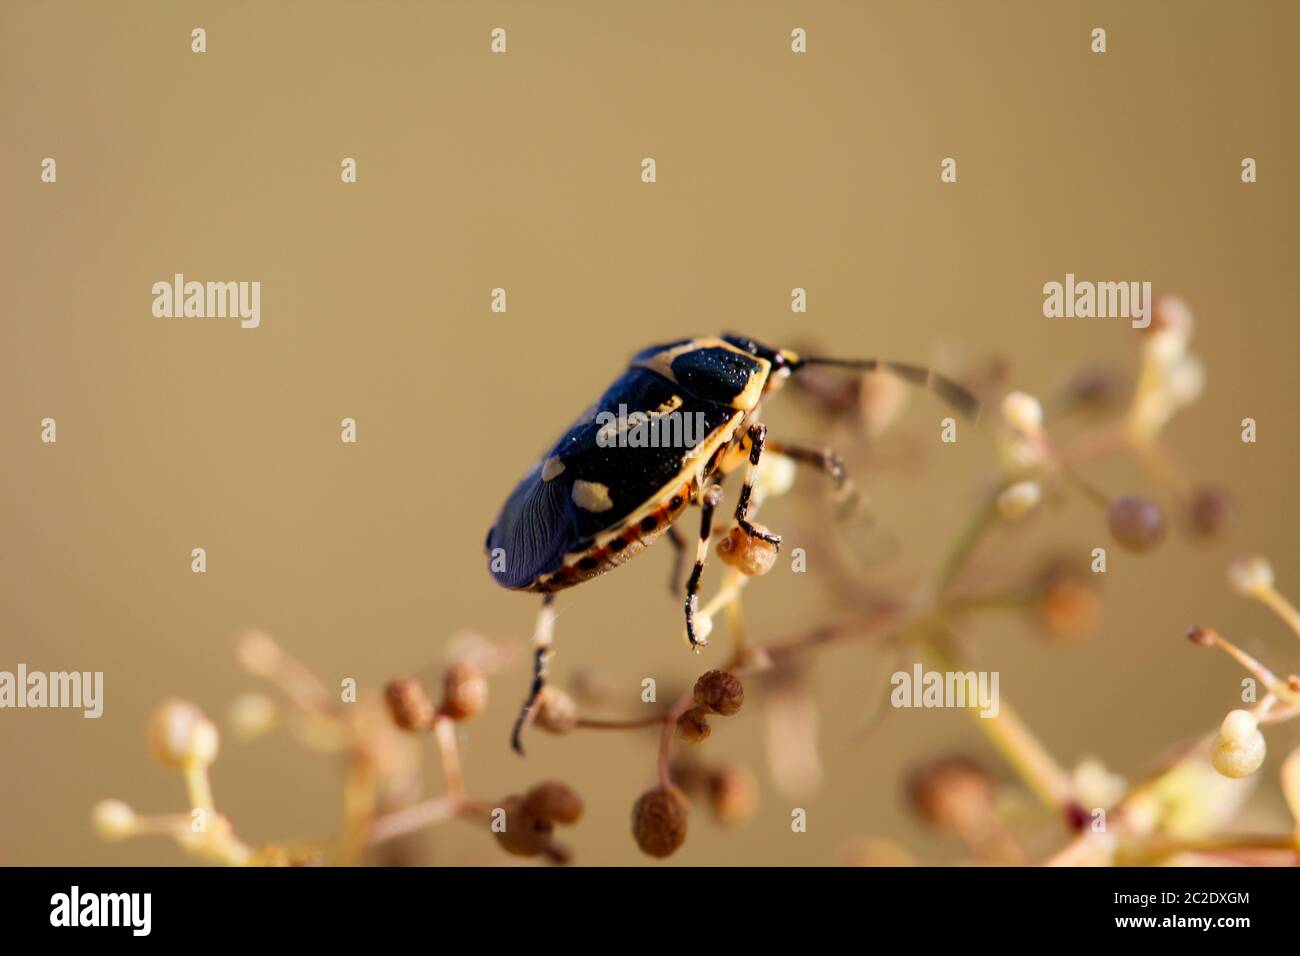 A bug or beetle on a plant Stock Photo